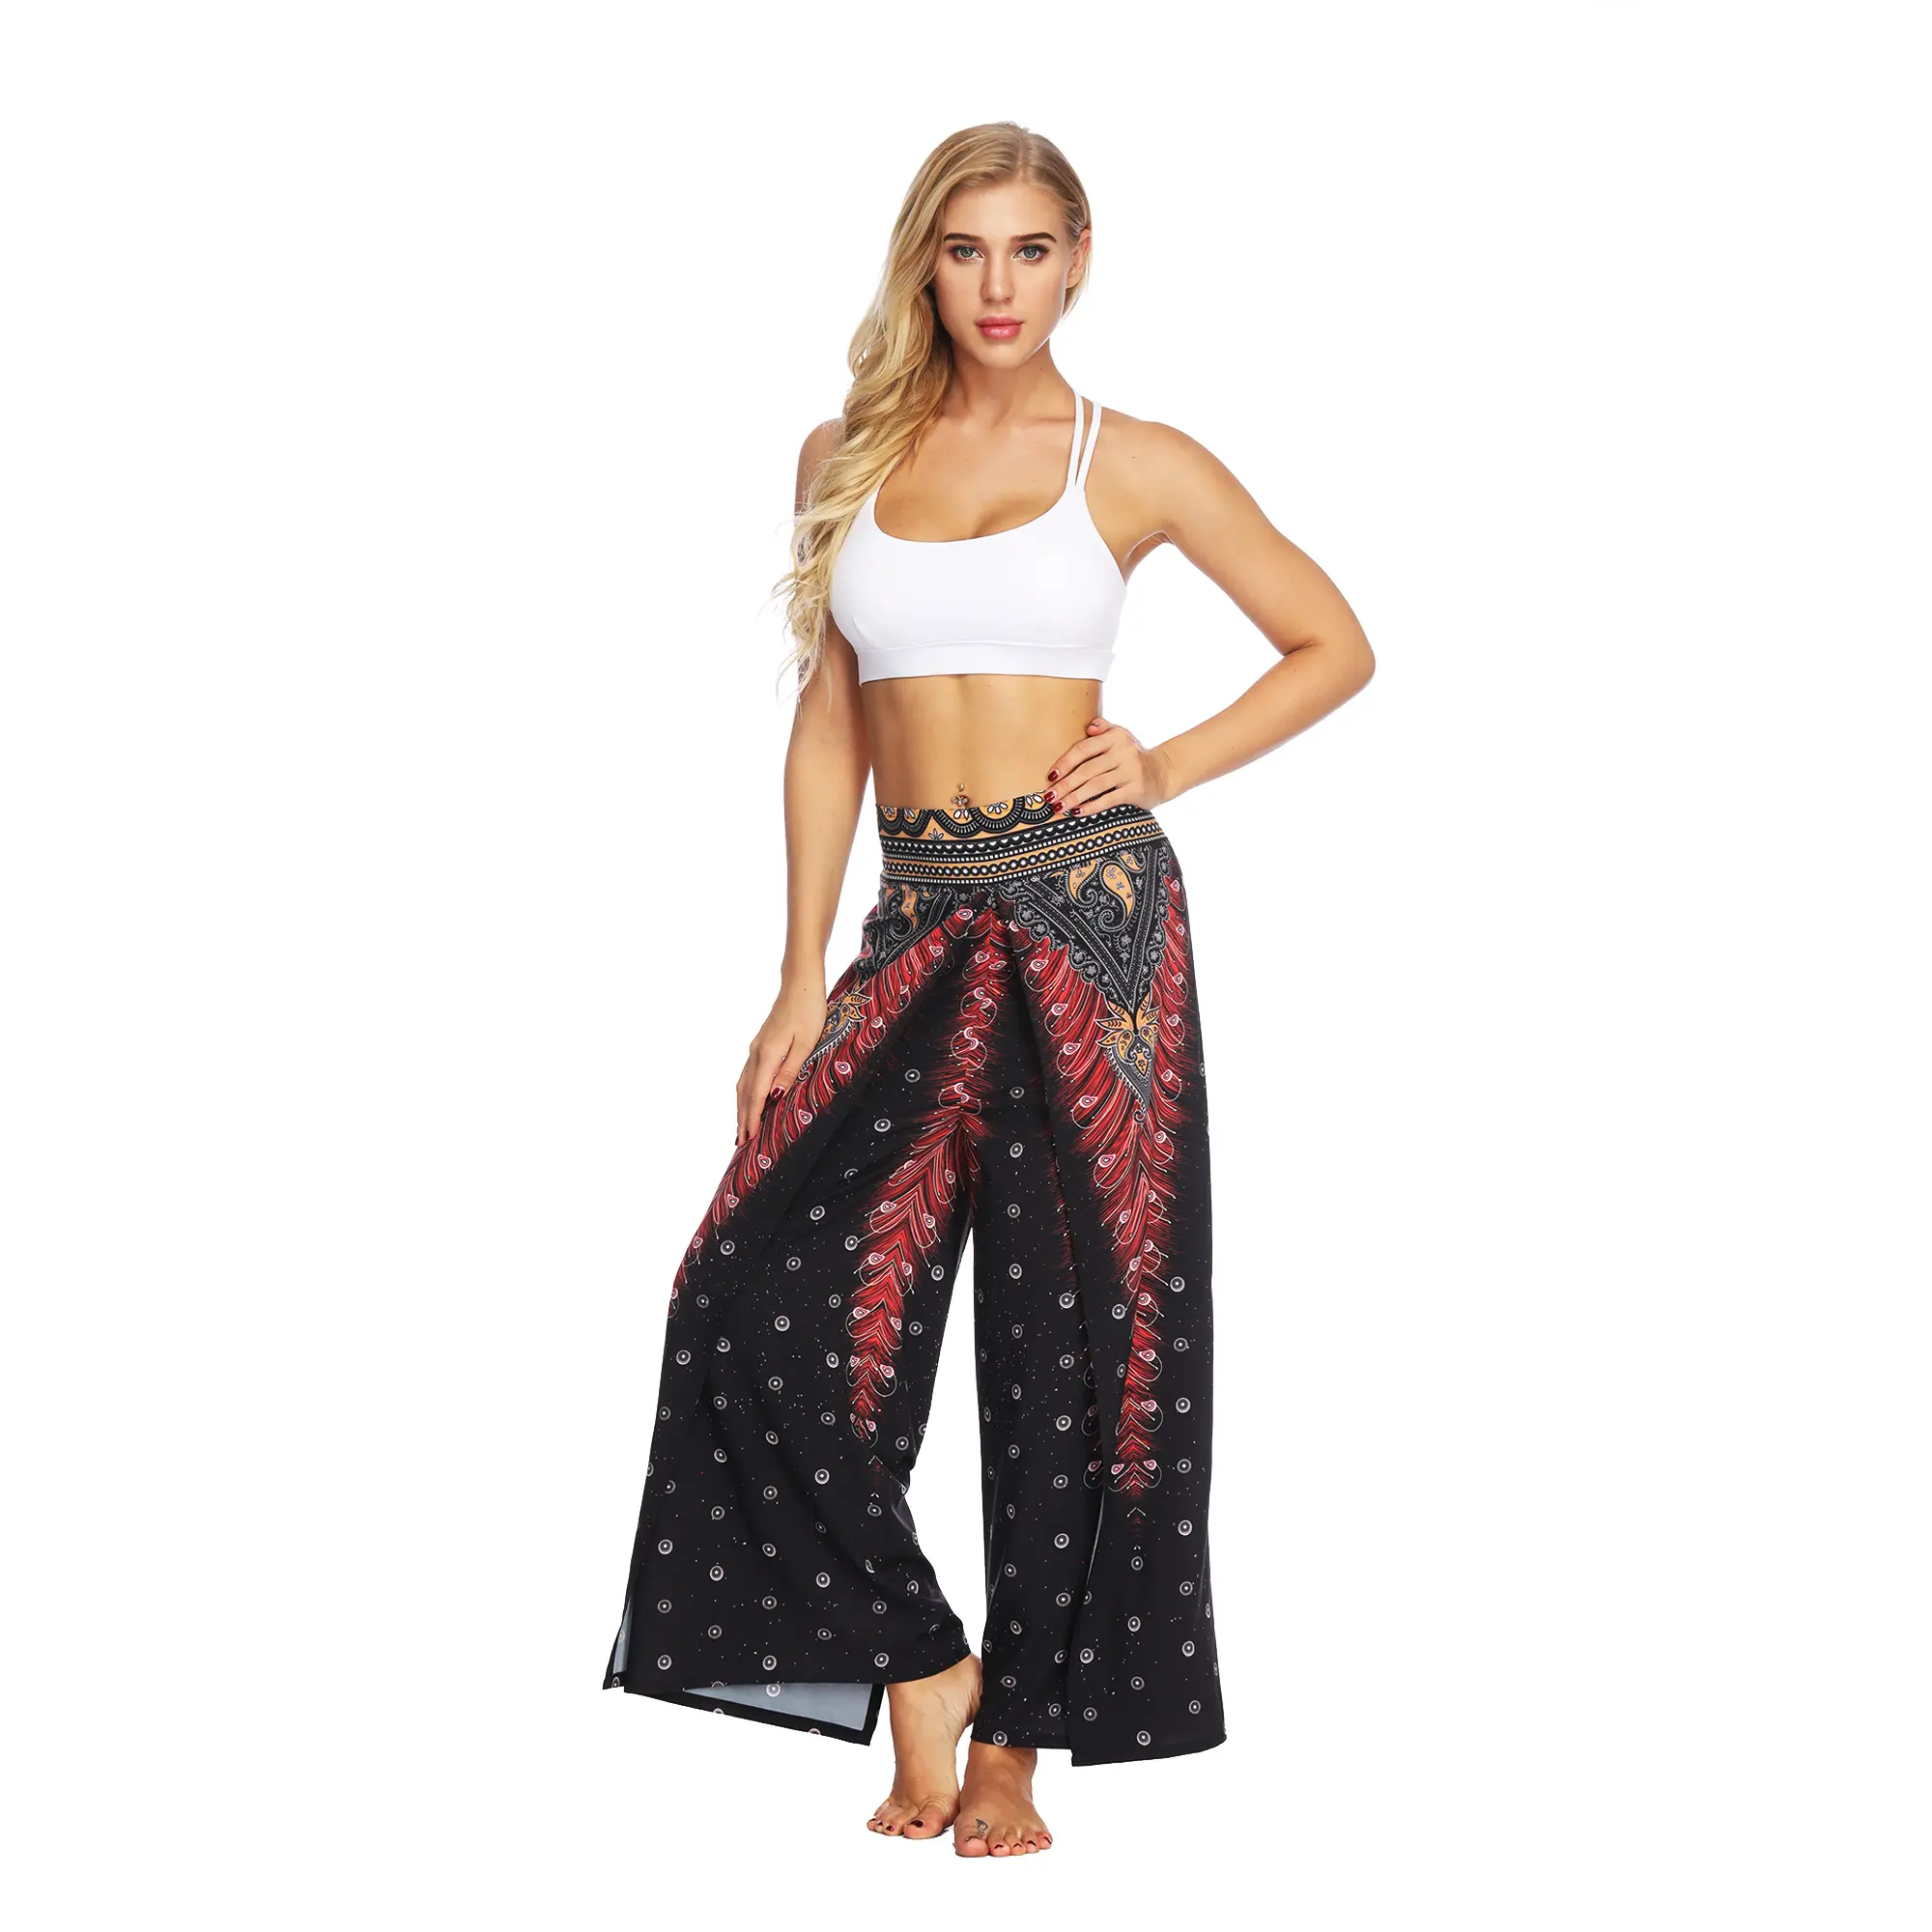 2021 new design of the new product printed women's casual wide leg pants hanging loose sports yoga pants wholesale sales in Eur